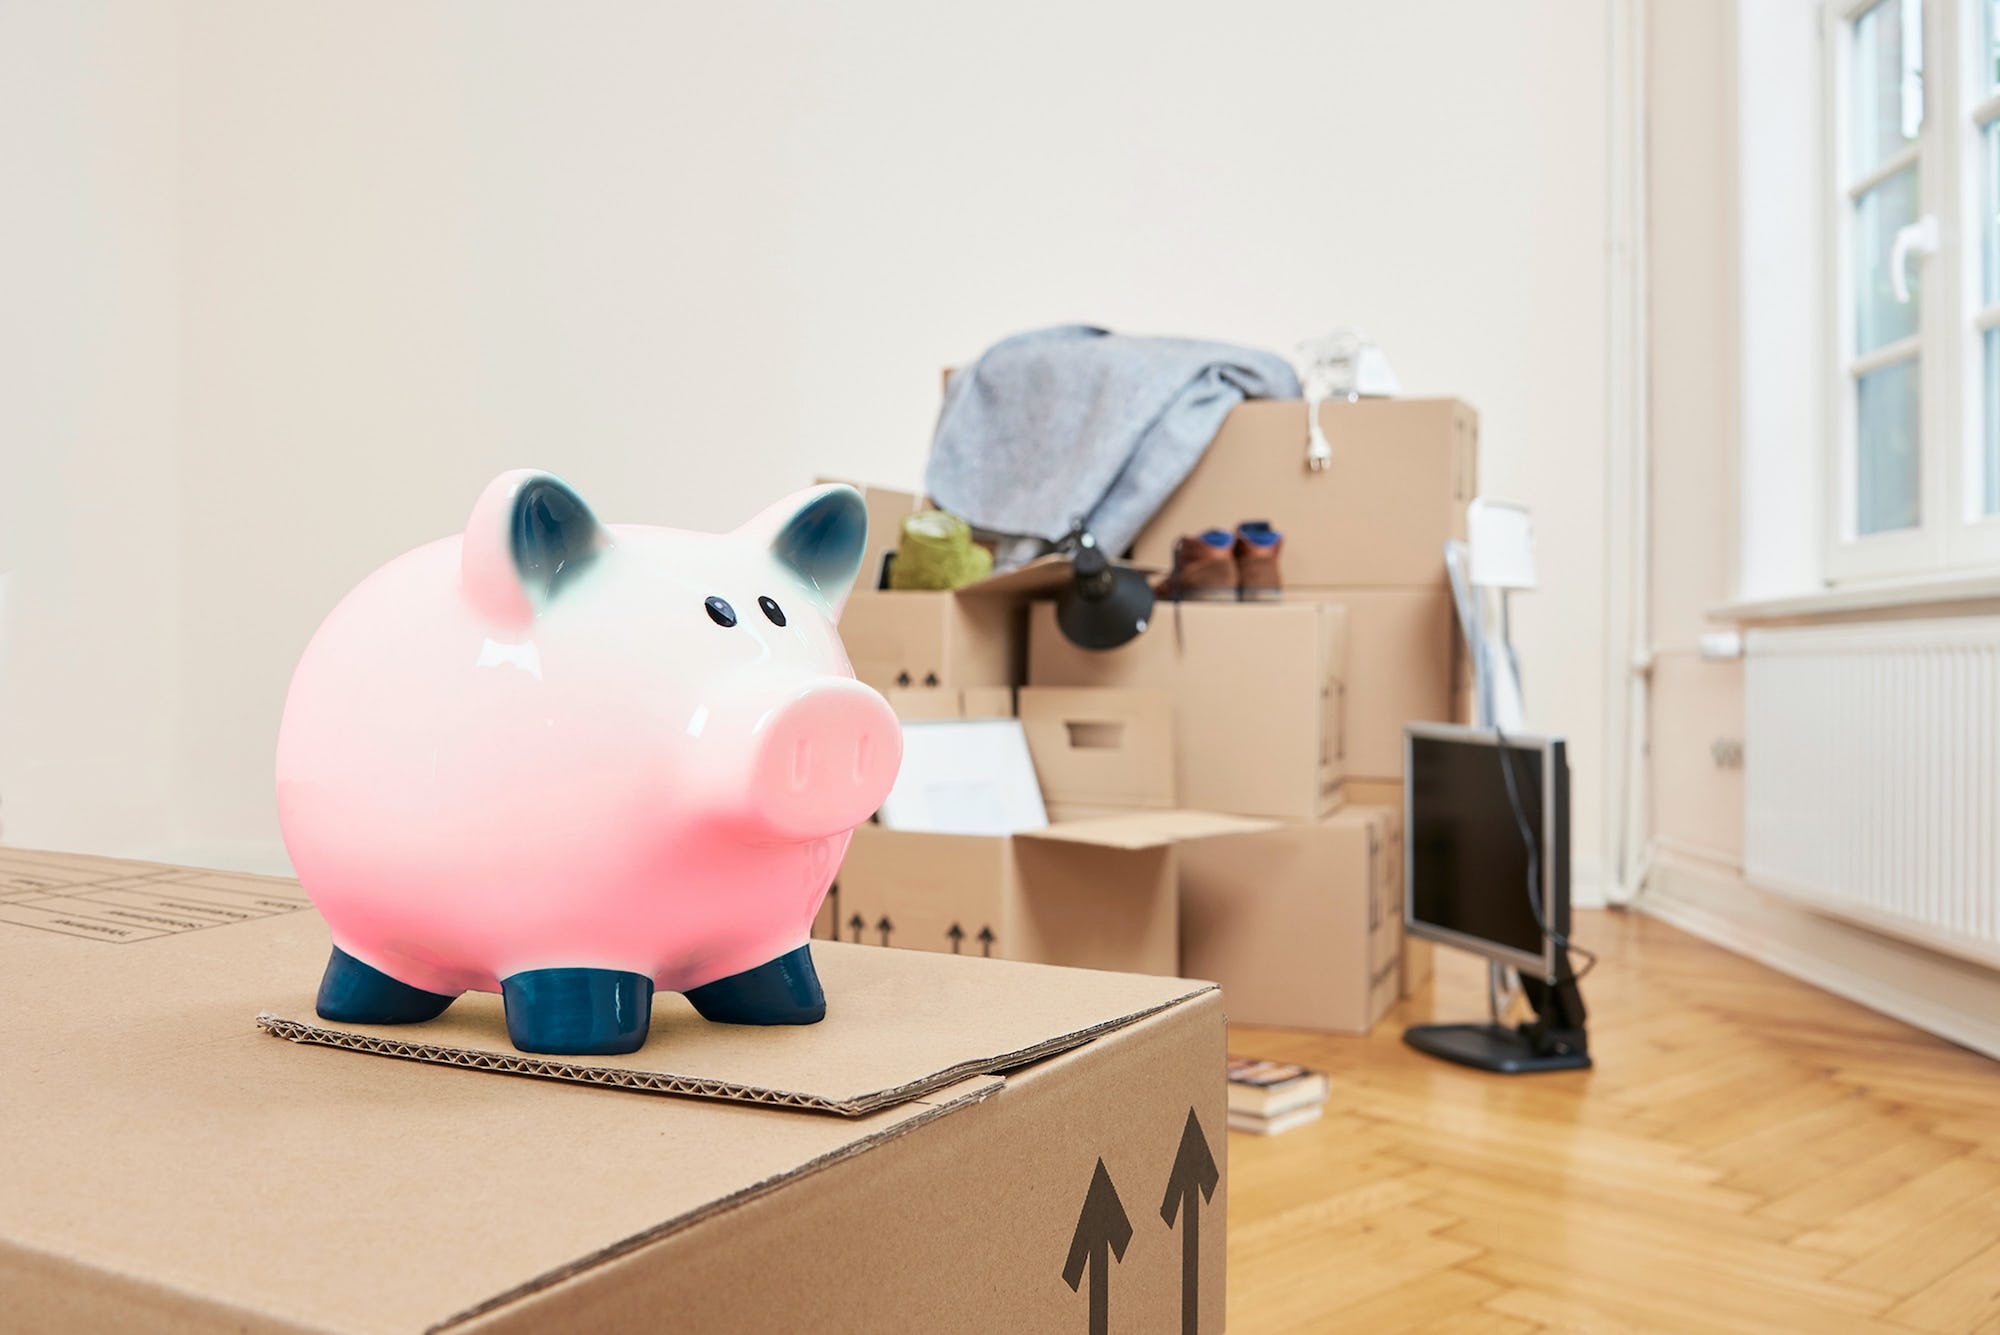 Moving boxes to relocate when it's time to downsize a home, with a pig piggy bank sitting on the moving box with household items in background